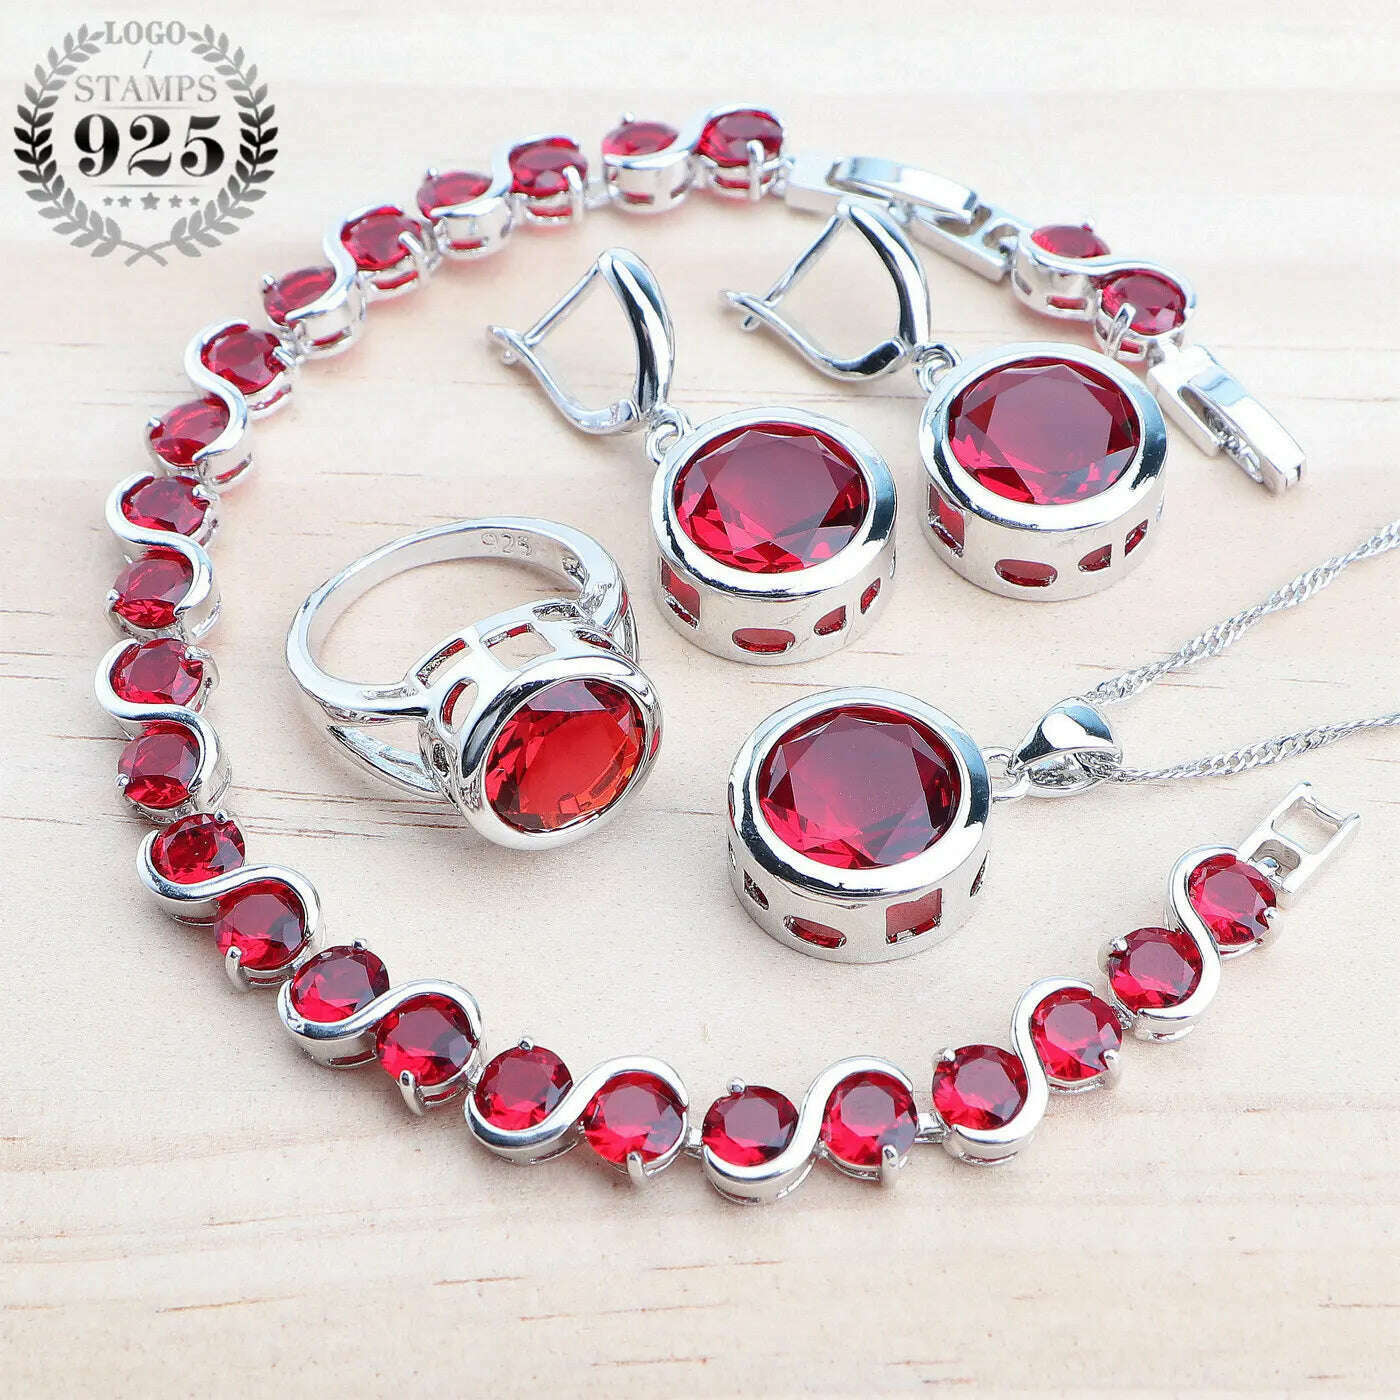 KIMLUD, Ladies 925 Silver Jewelry Sets Champagne Zircon For Women Wedding Jewelry Rings Bracelets Stones Earrings Pendant Necklace Set, 4PCS-Red / 6, KIMLUD Womens Clothes